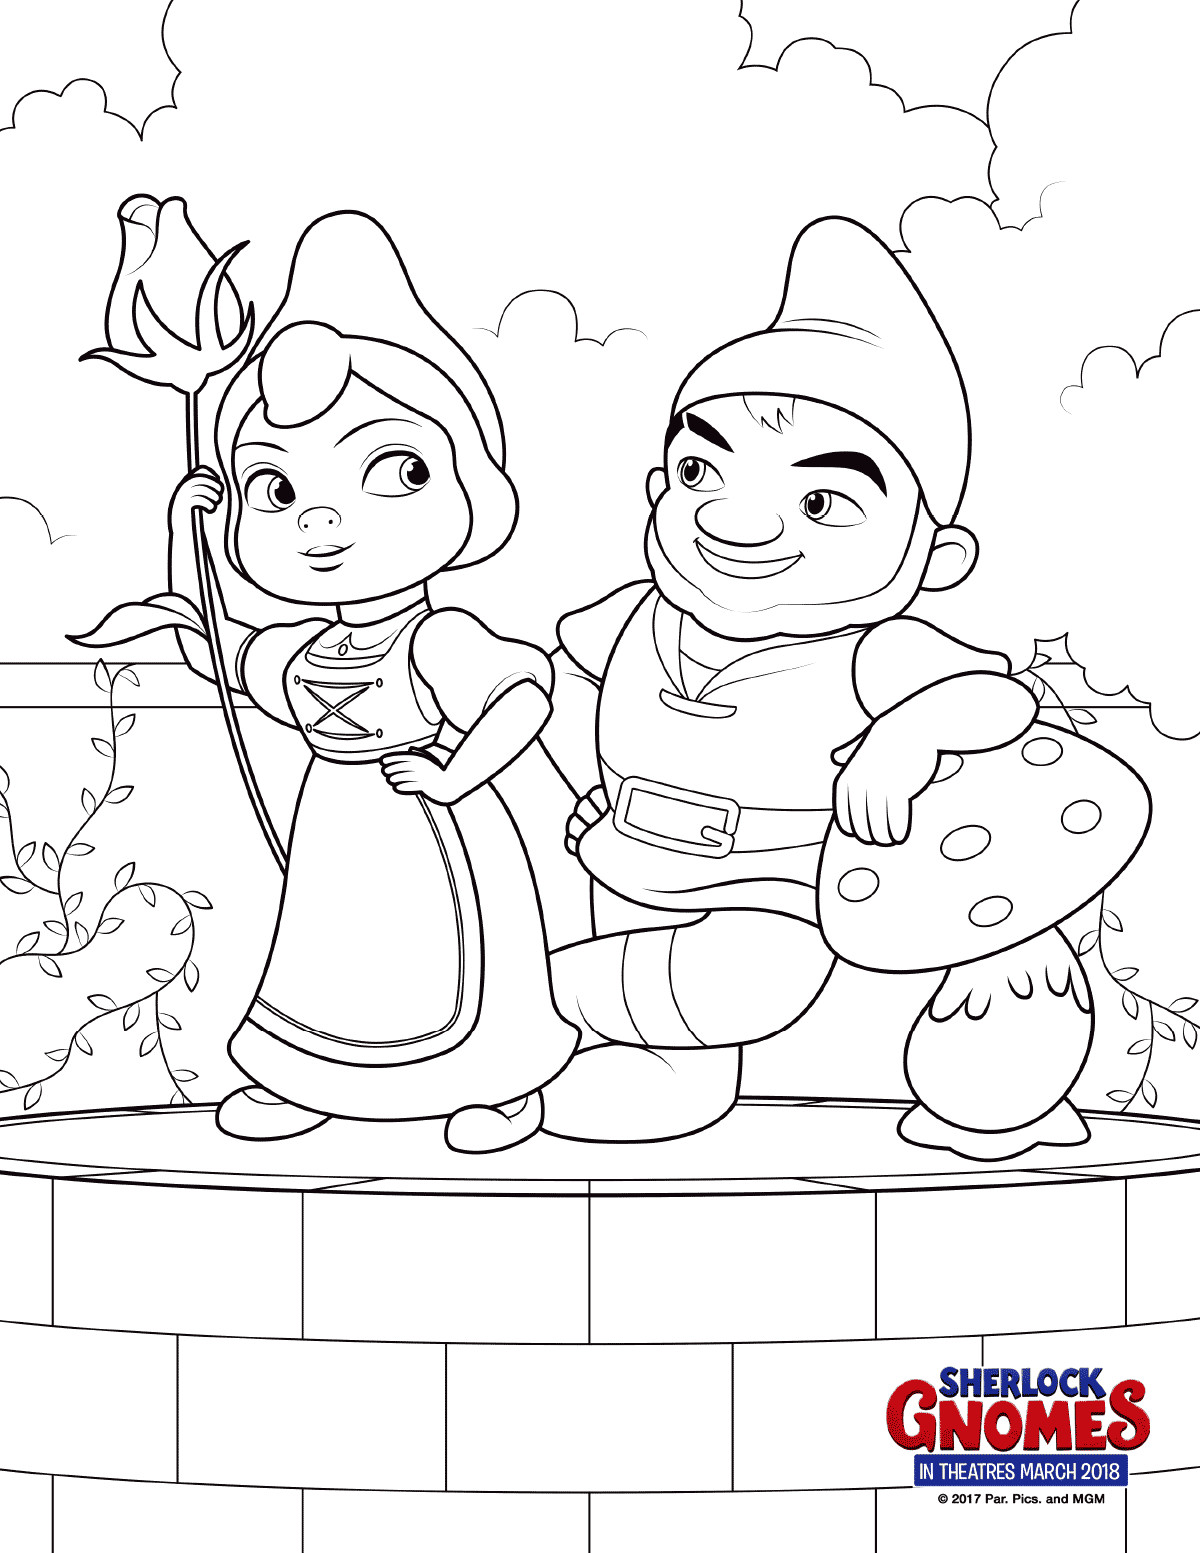 Gnome Coloring Pages Printable
 Free Printable Sherlock Gnomes Coloring Pages